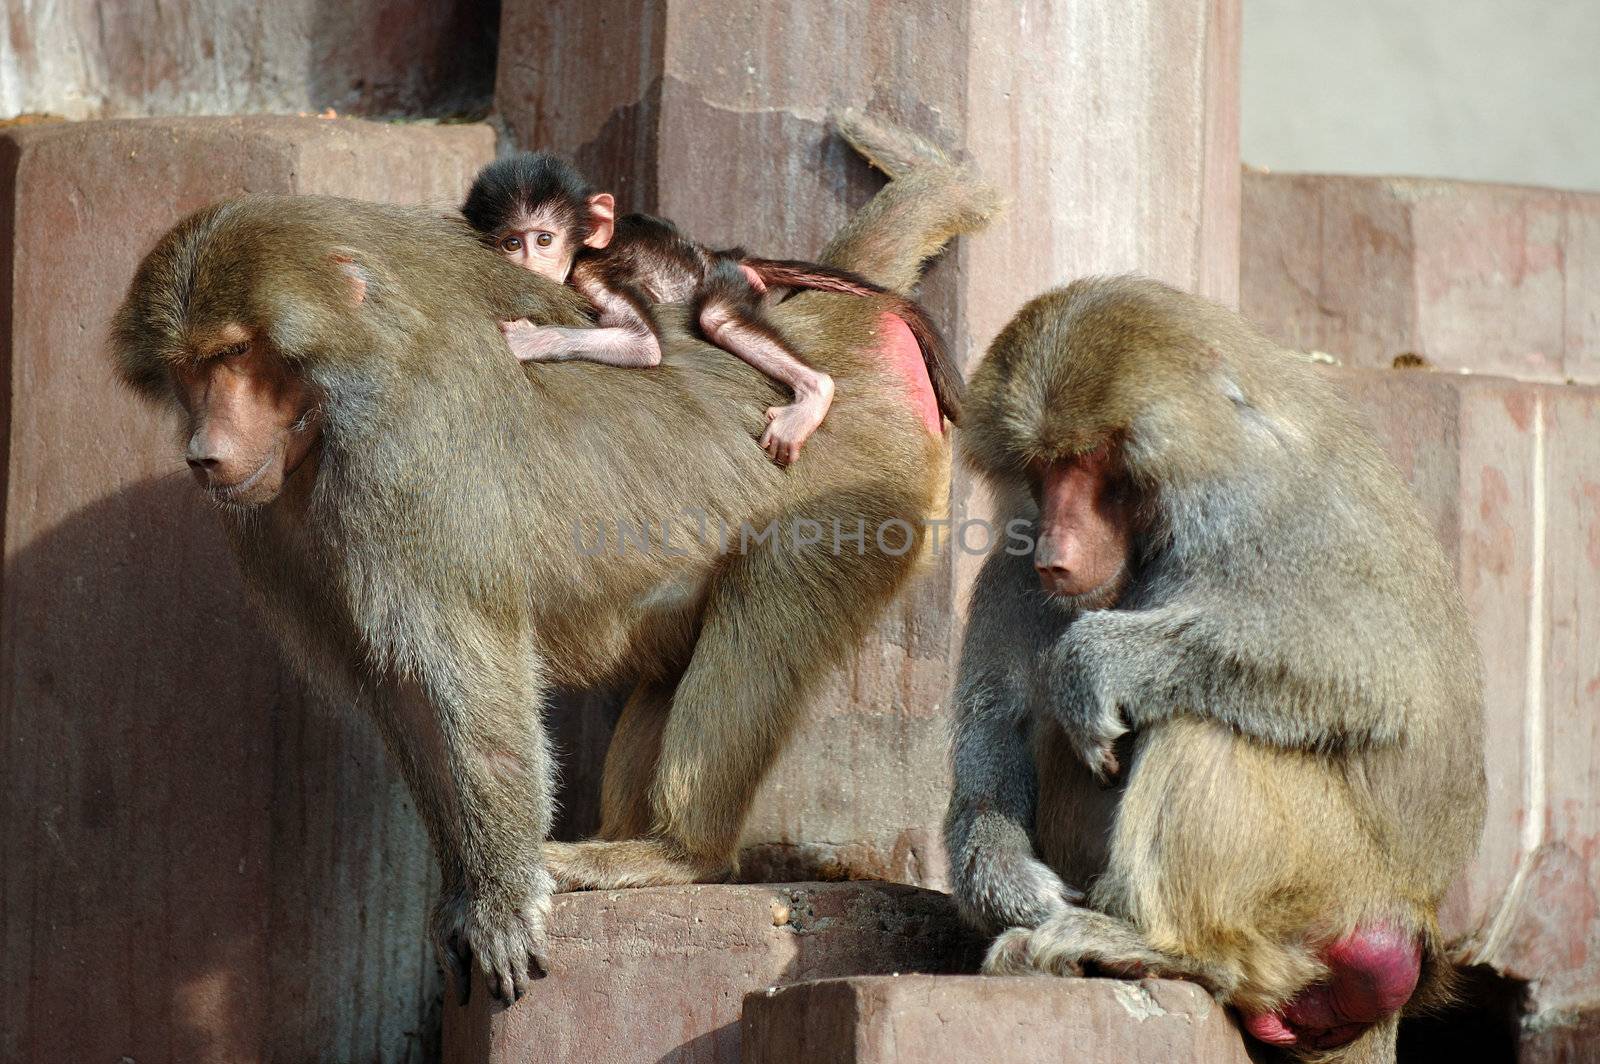 Monky family. Mother, father and newborn baby